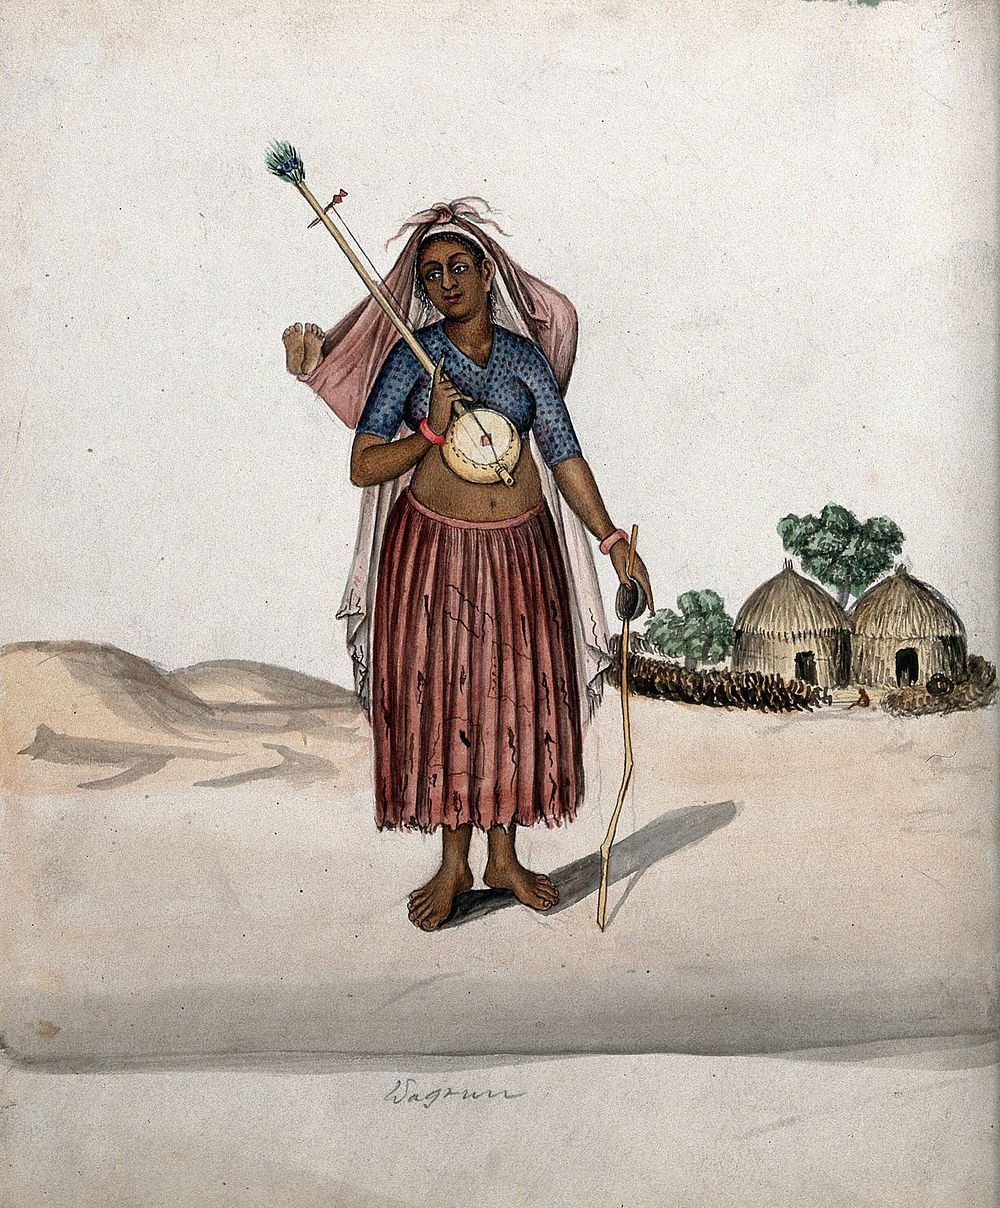 A village woman carrying a musical instrument in one hand, a stick with a small bowl in the other and a baby tied up in a…